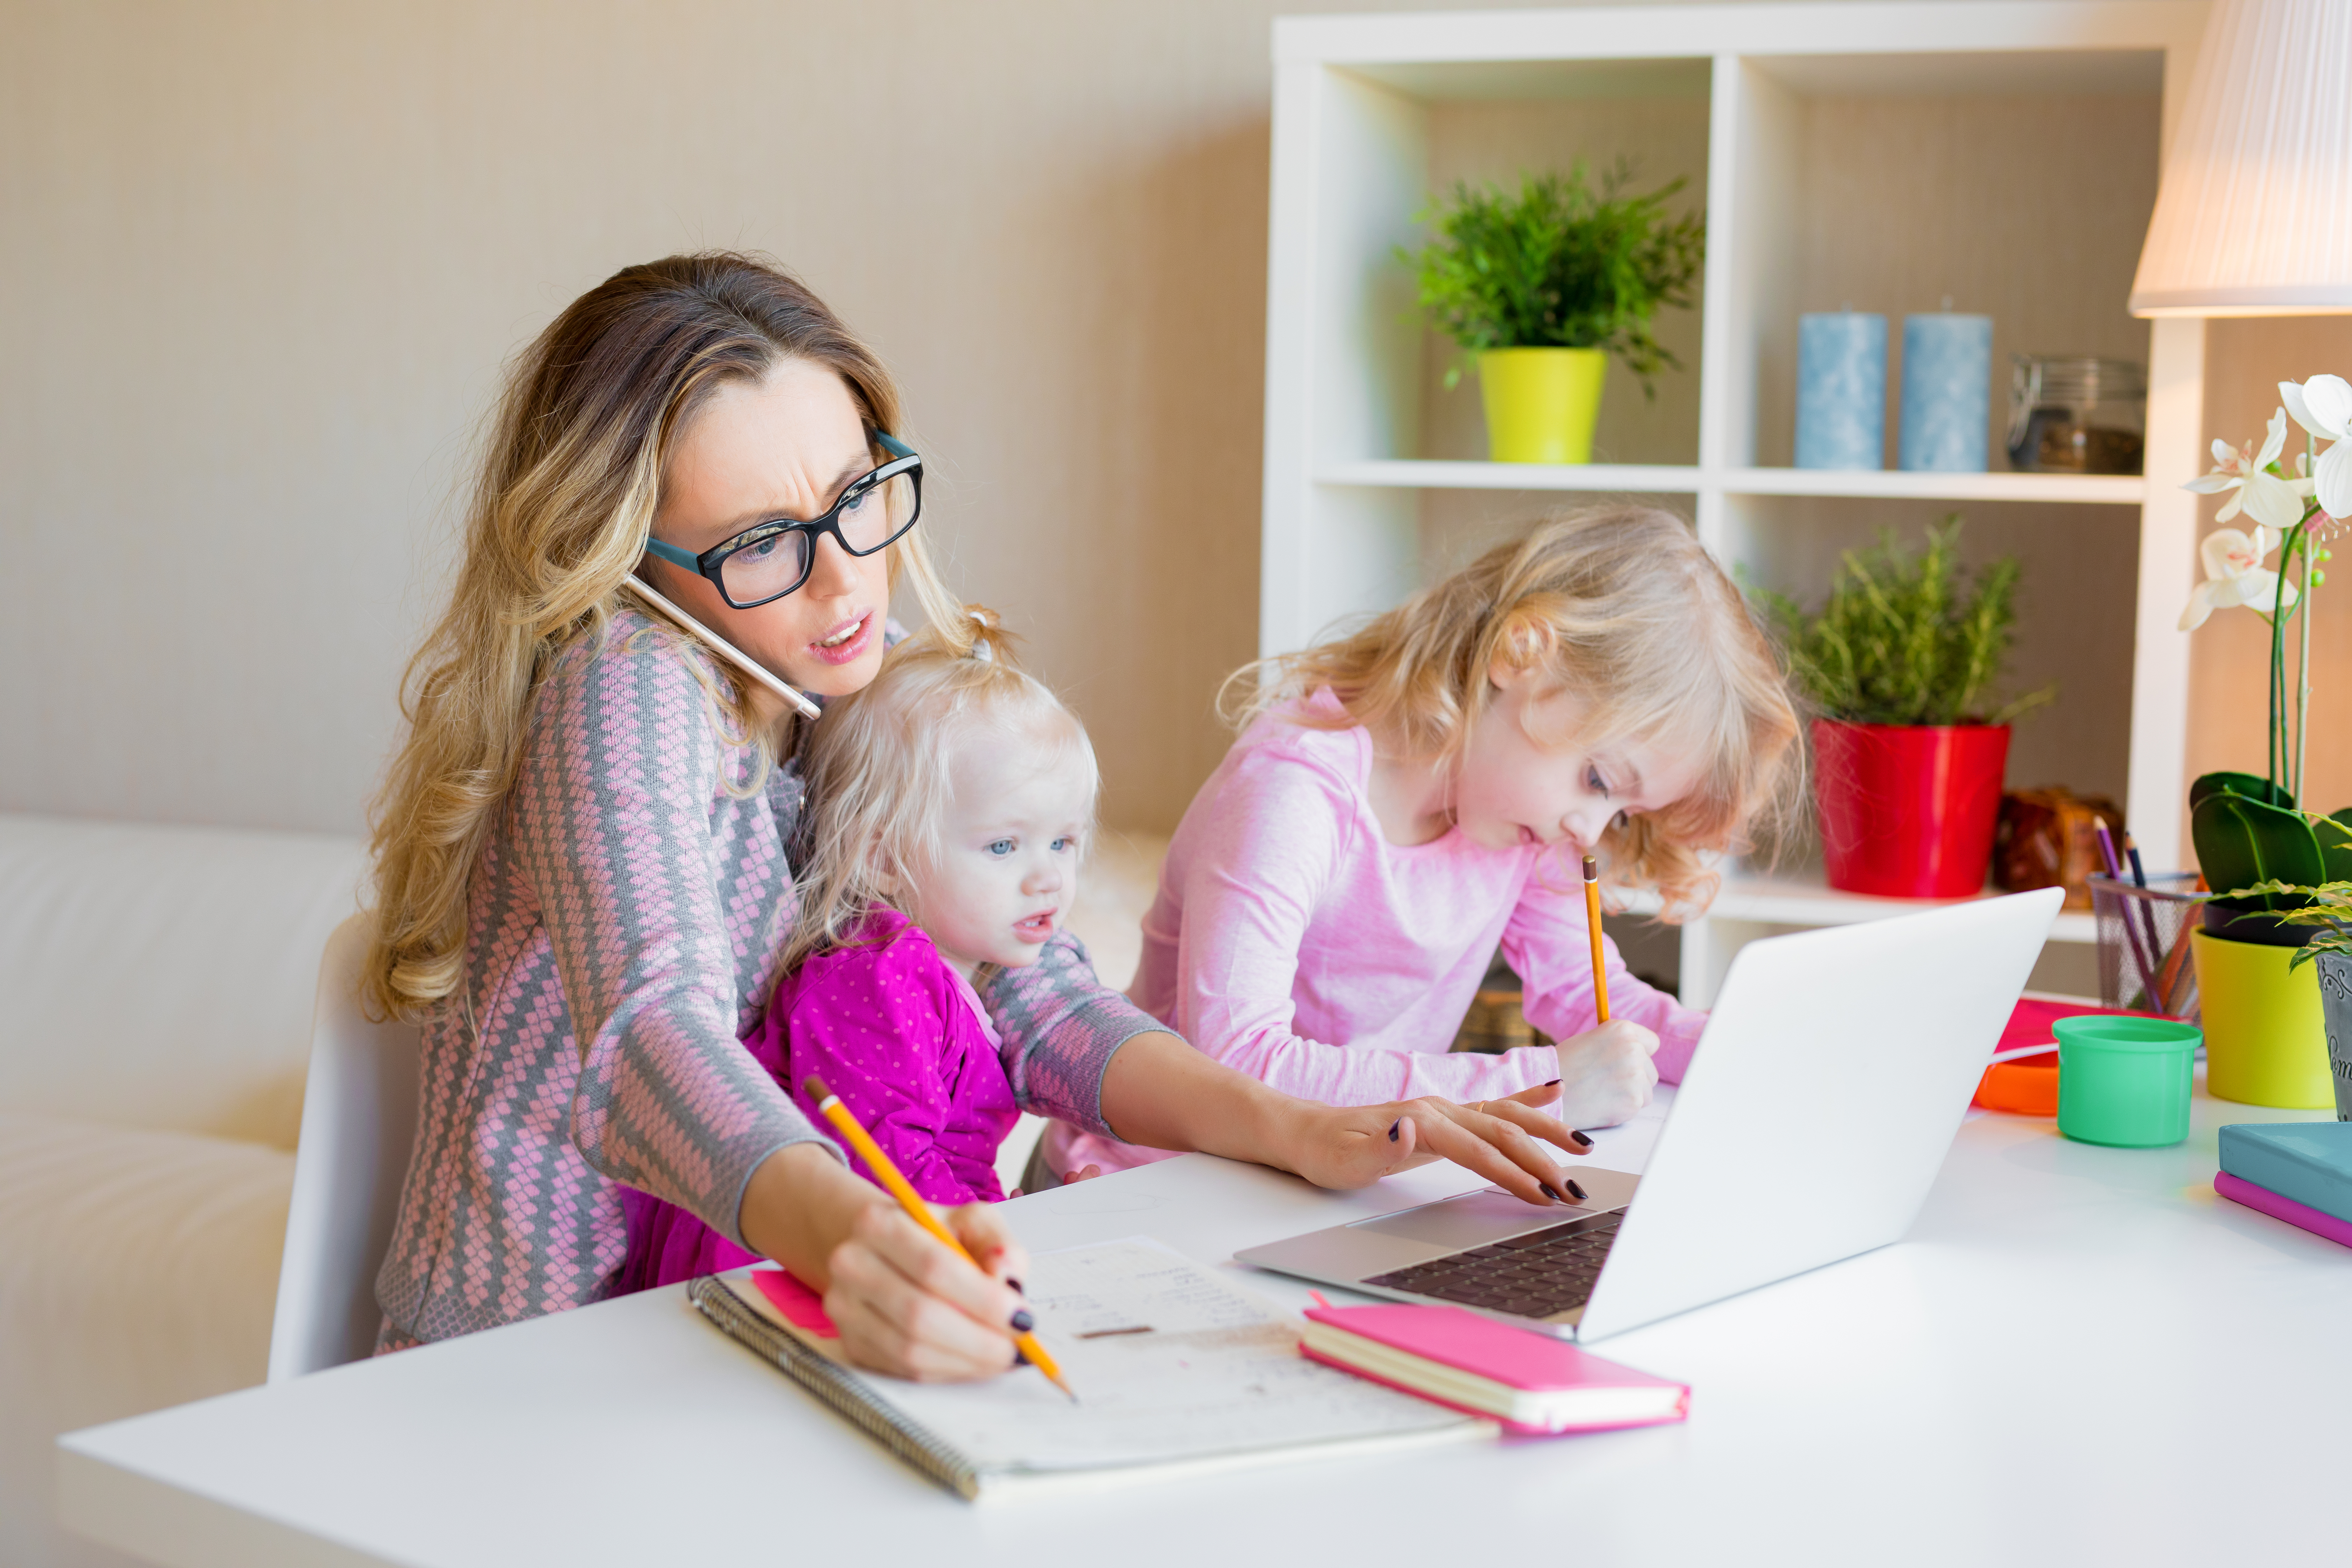 A woman working with two children on her lap | Source: Shutterstock